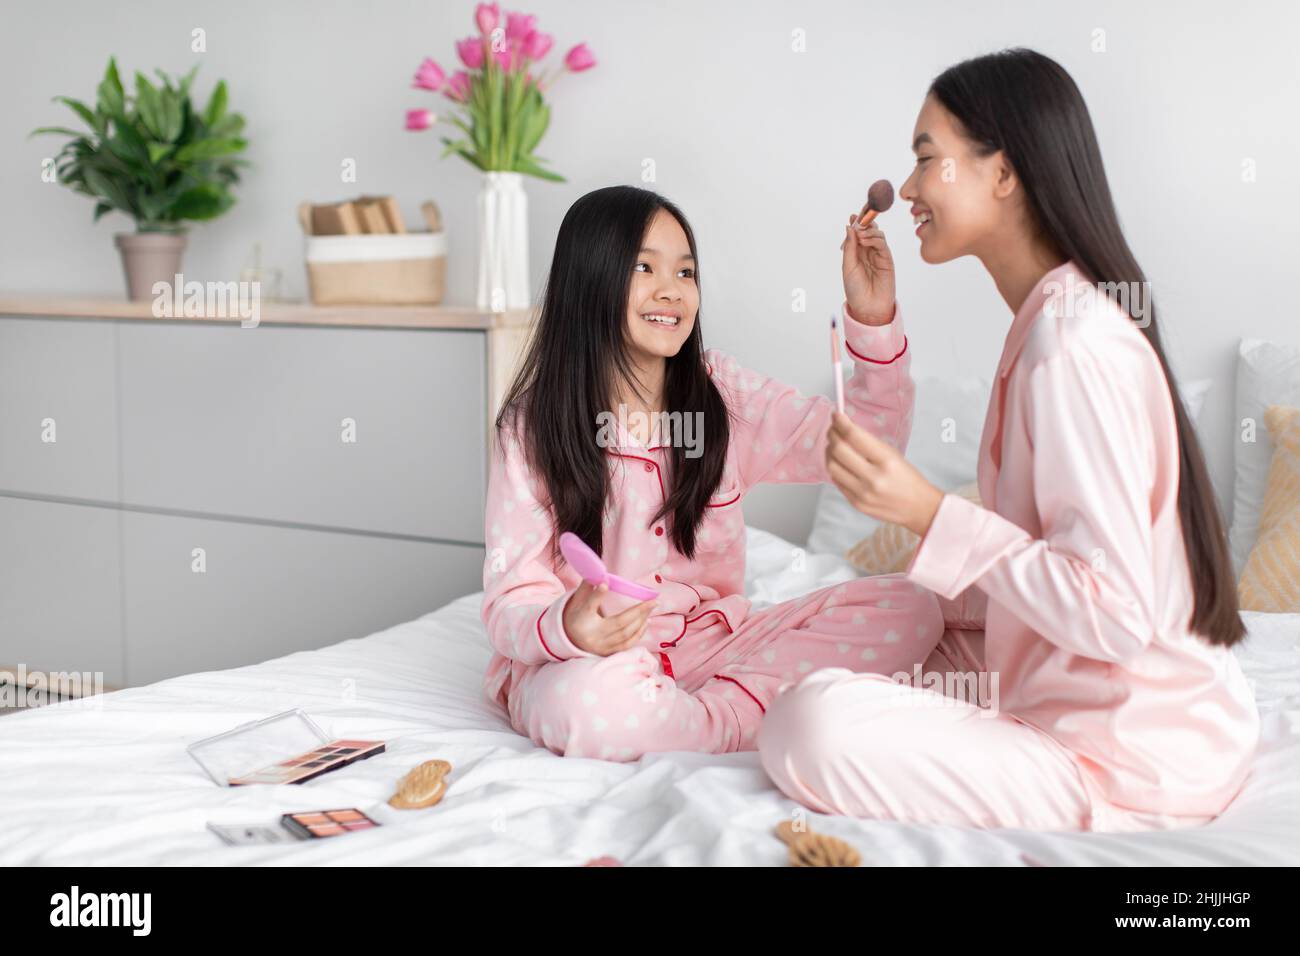 Cheerful happy korean young girl applying powder to millennial woman face, sitting on bed with cosmetics Stock Photo